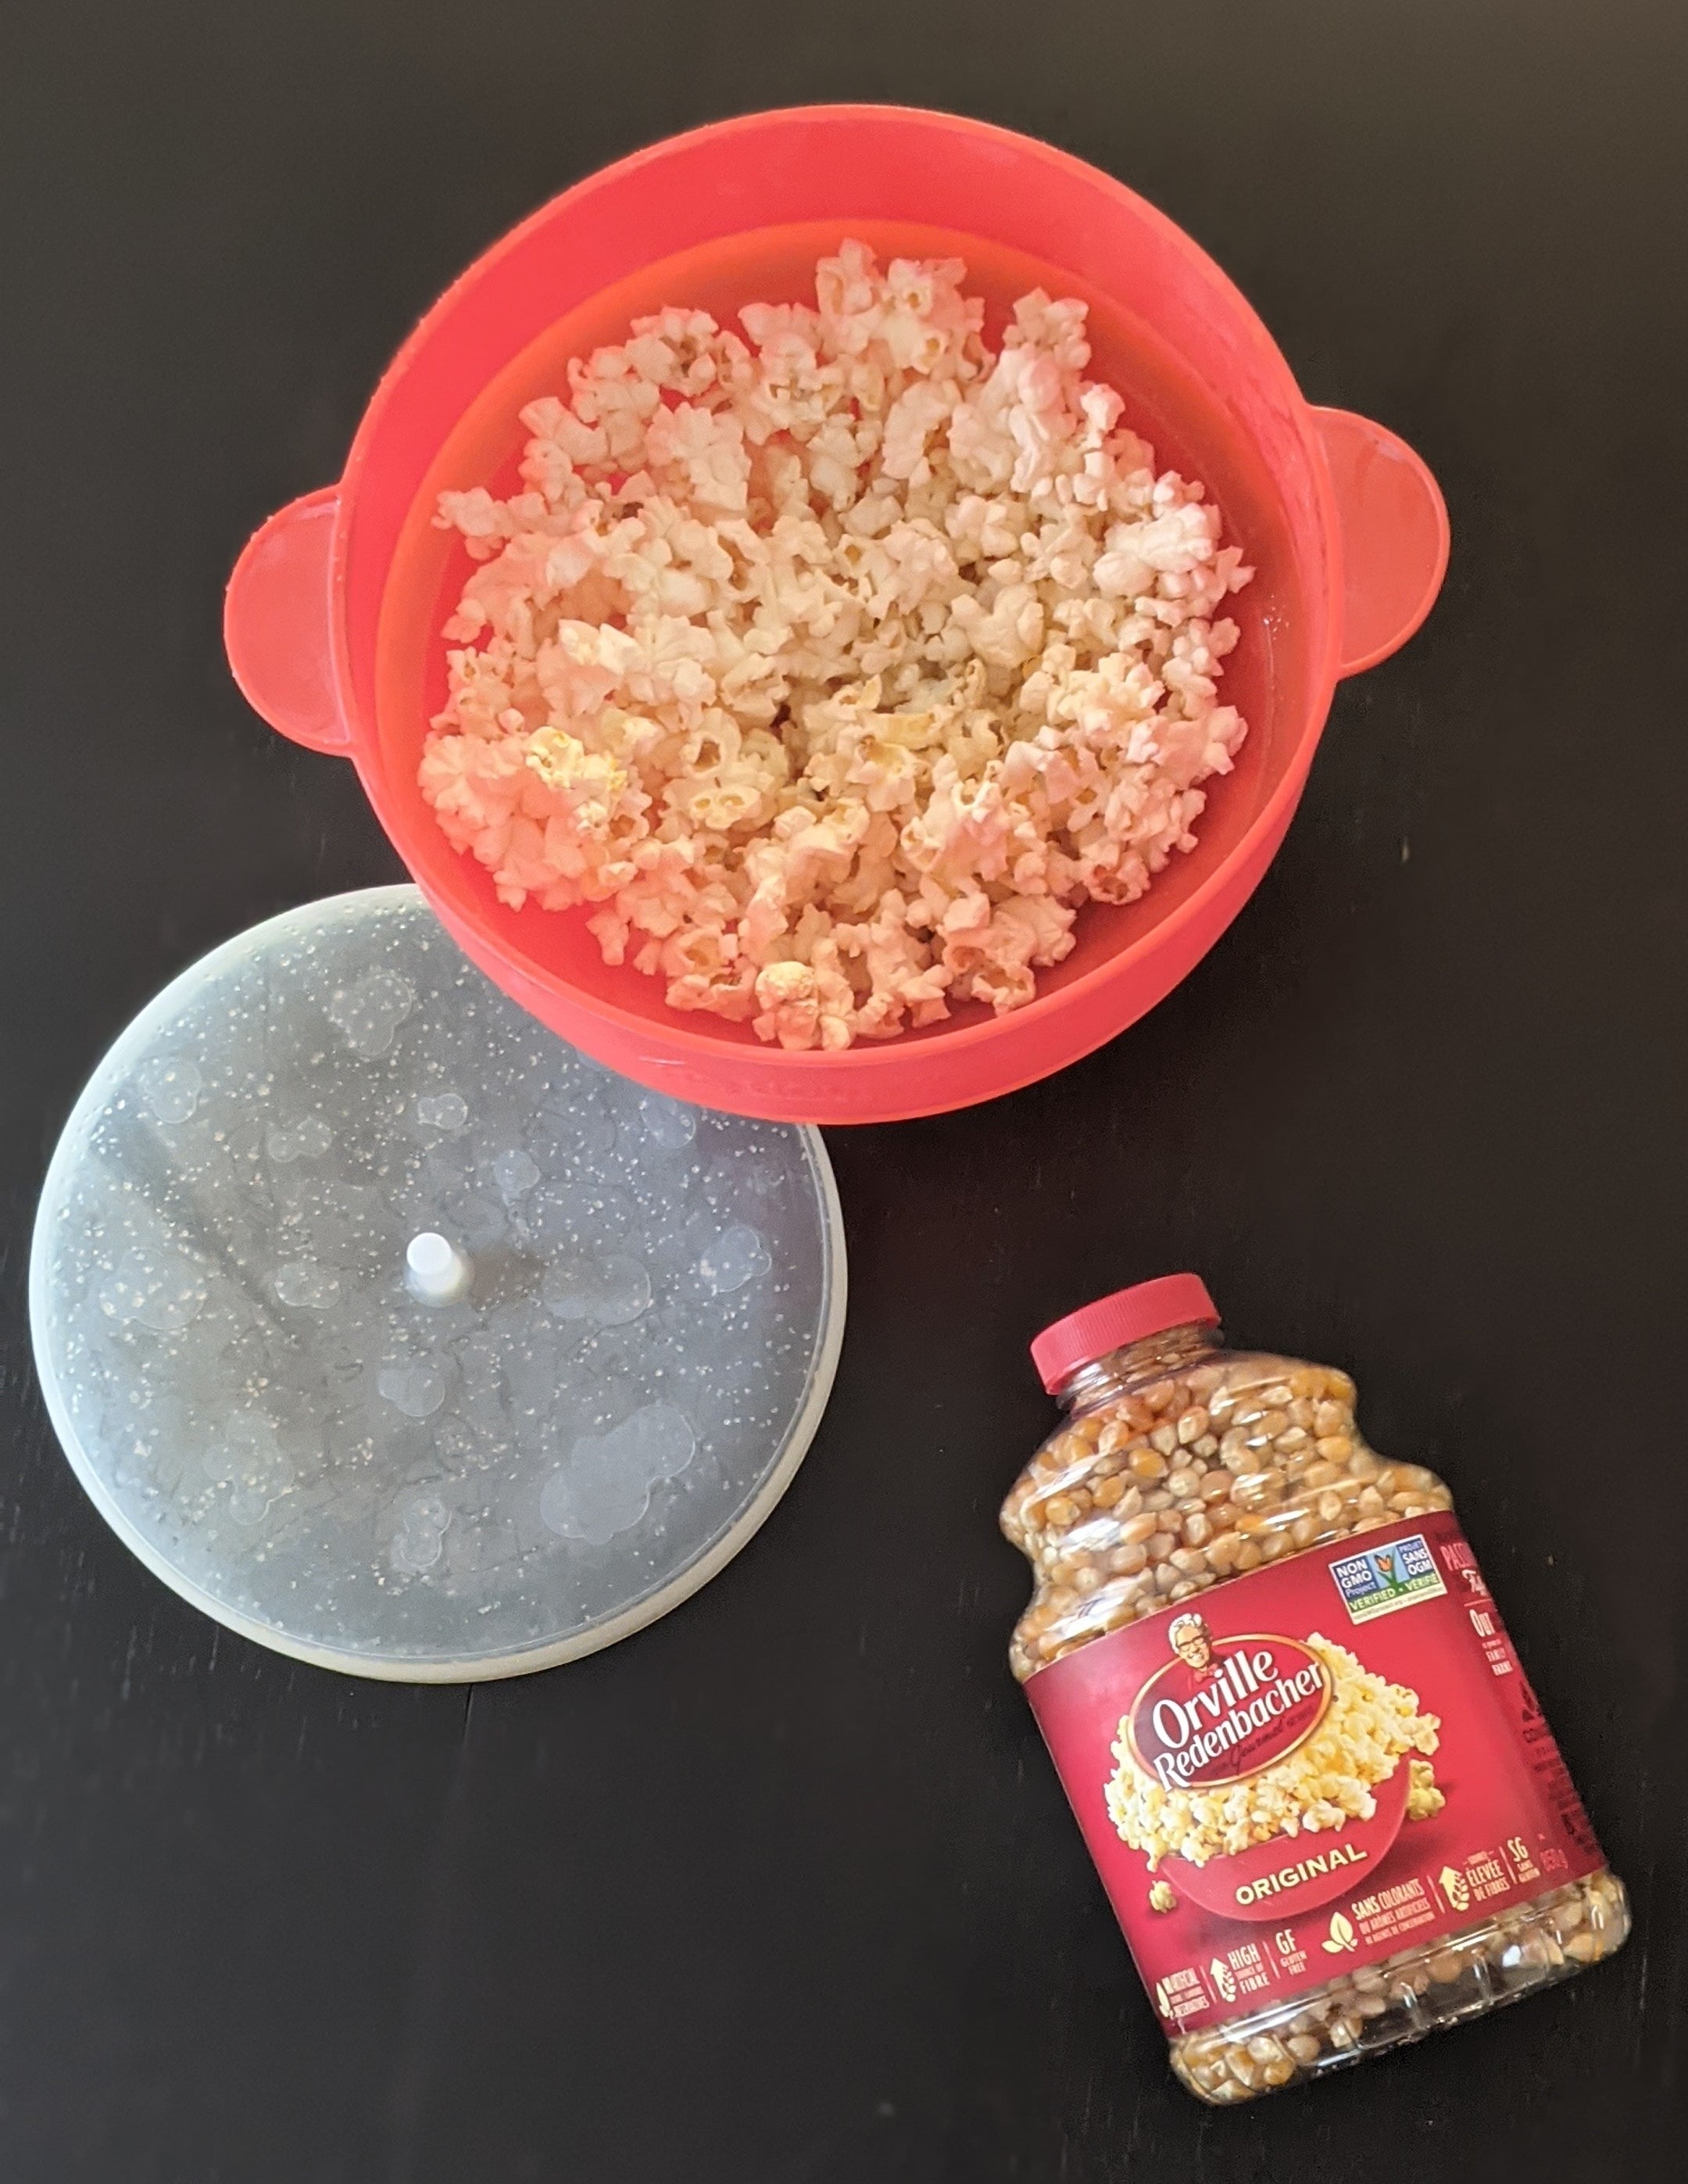 The silicone popcorn maker filled with delicious looking popcorn